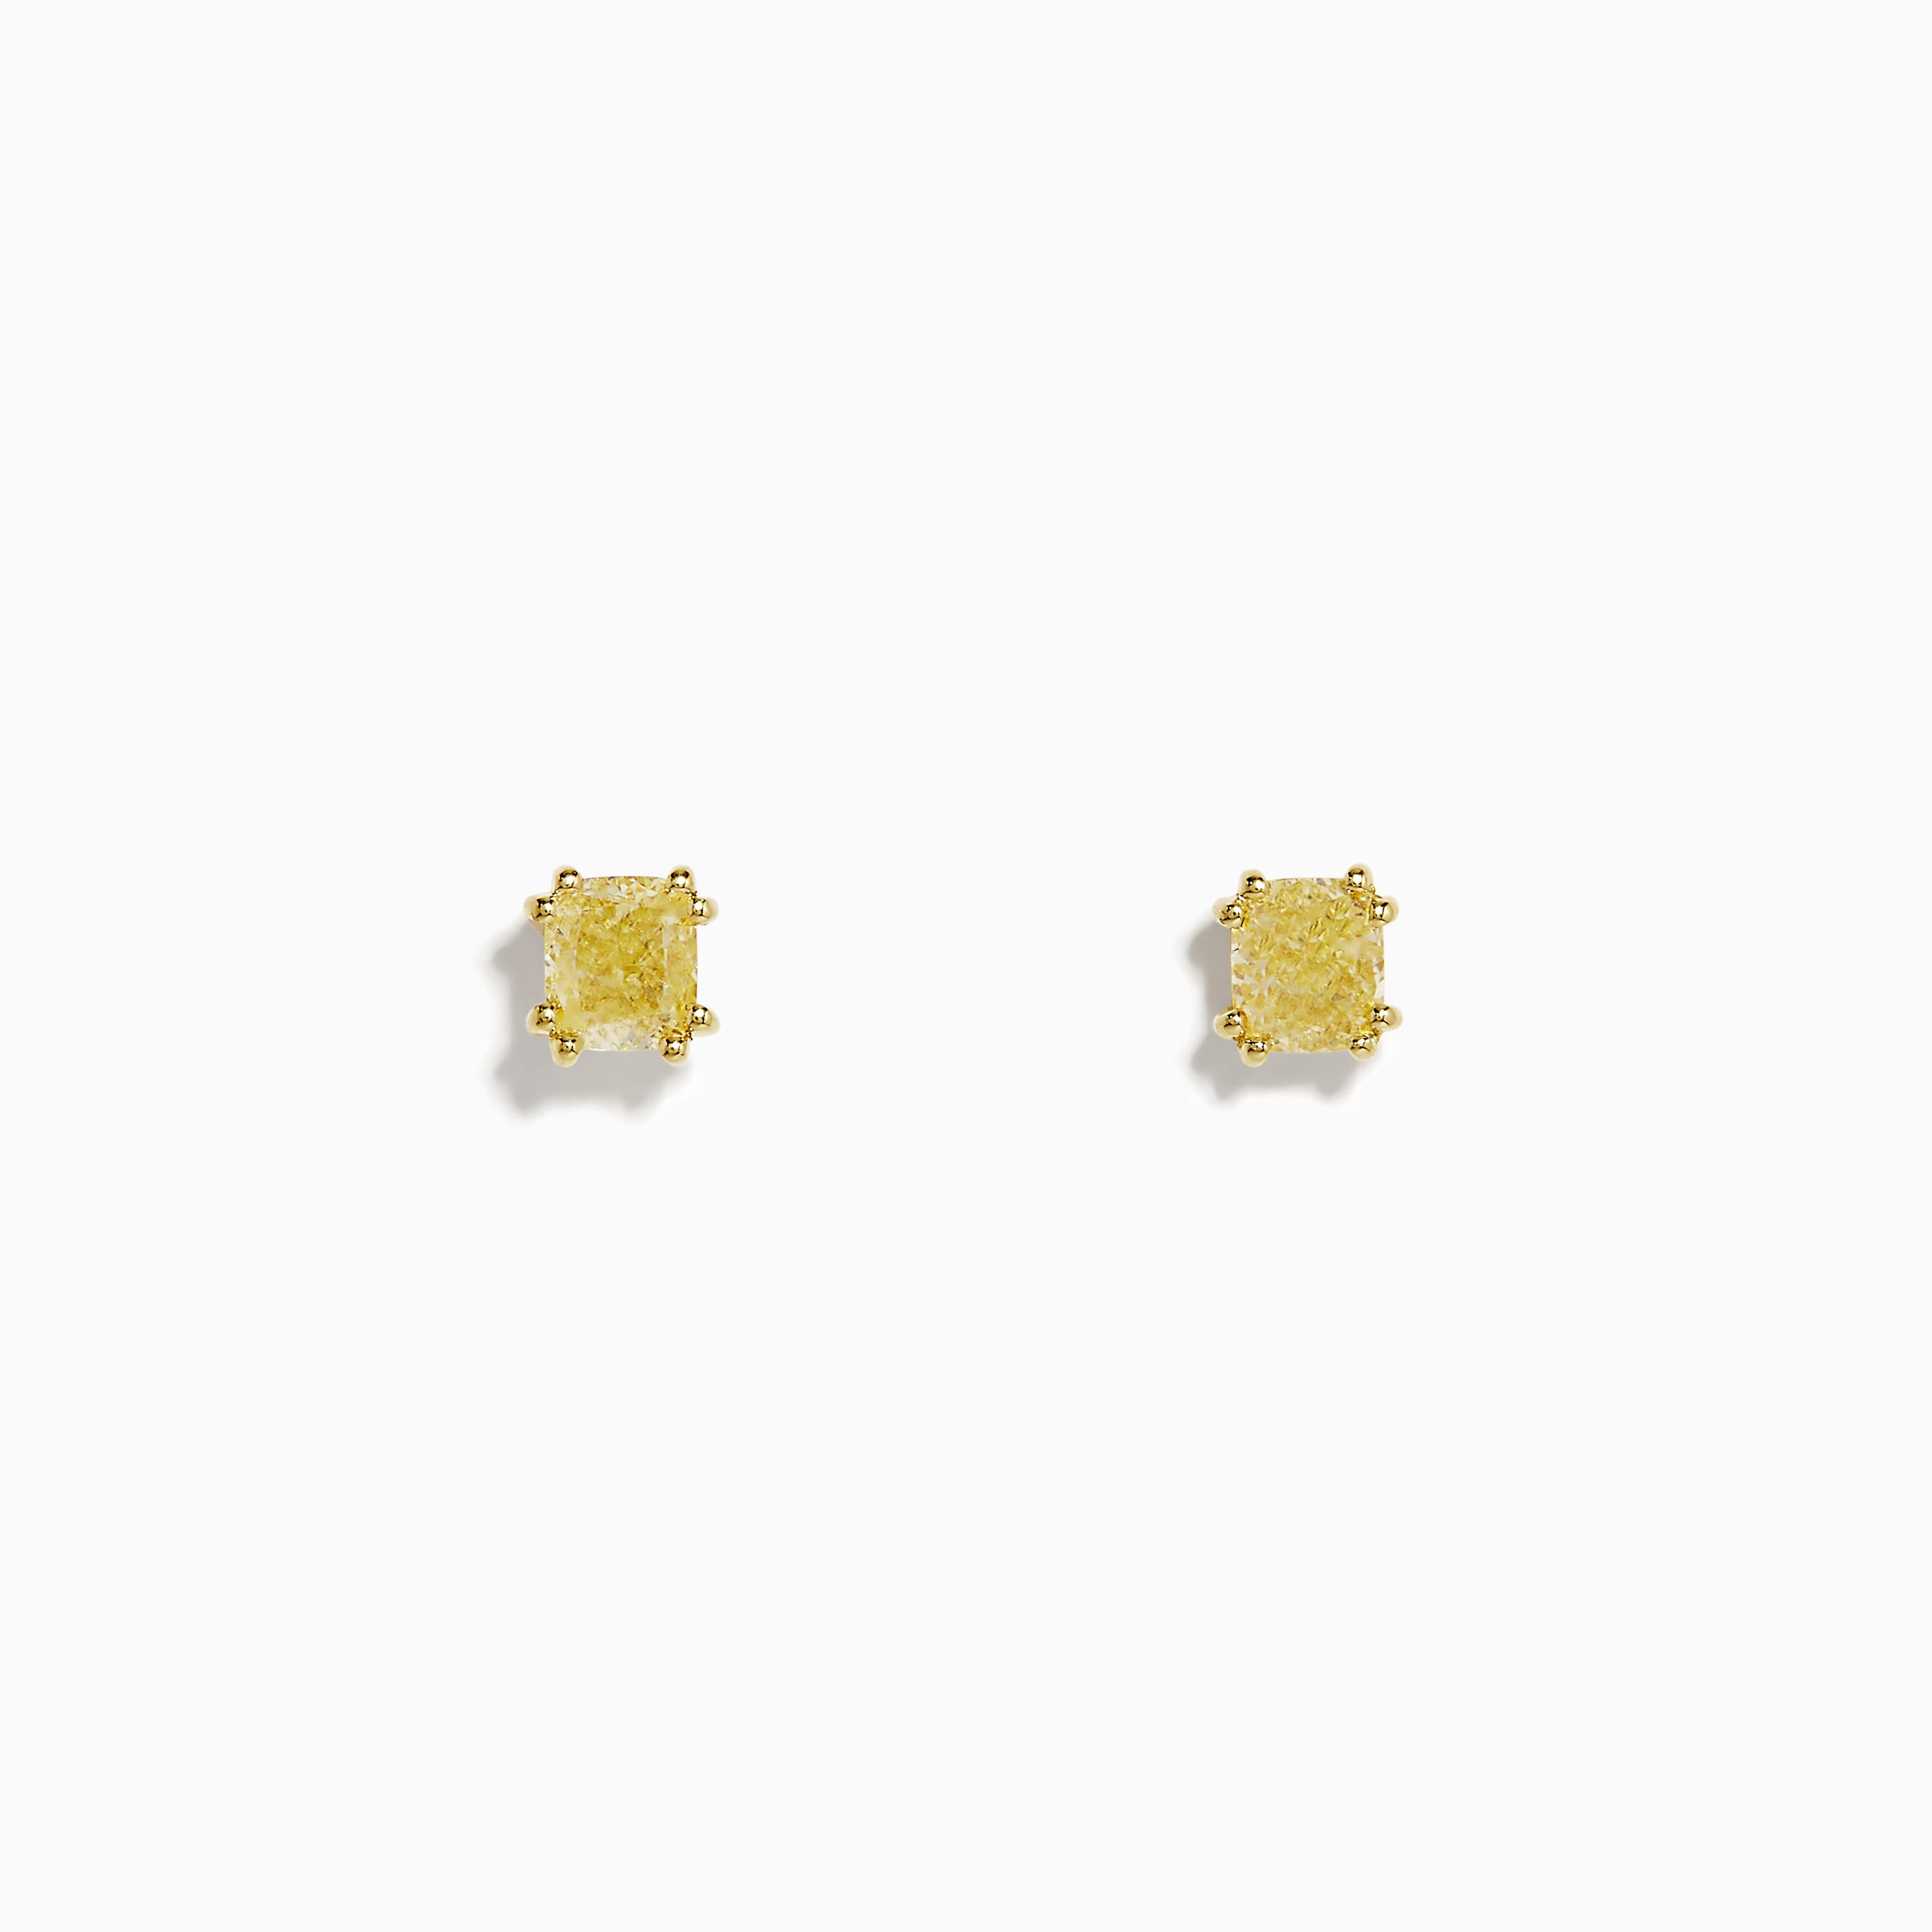 Gold and Pavé Diamond Luna Stud Earrings in 18K Yellow Gold with Safety Earring Backs